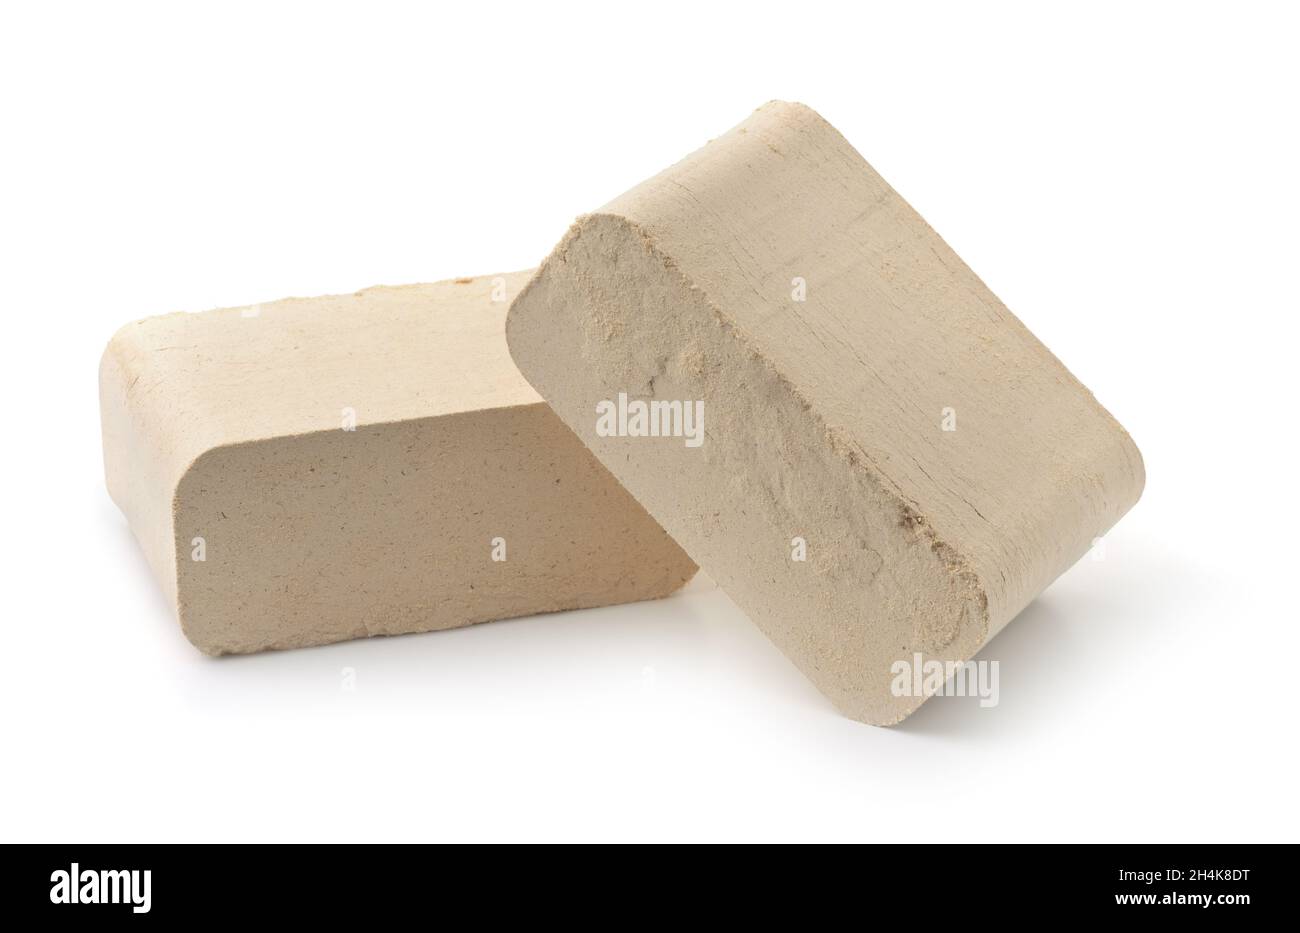 Two pressed sawdust fuel briquettes isolated on white Stock Photo